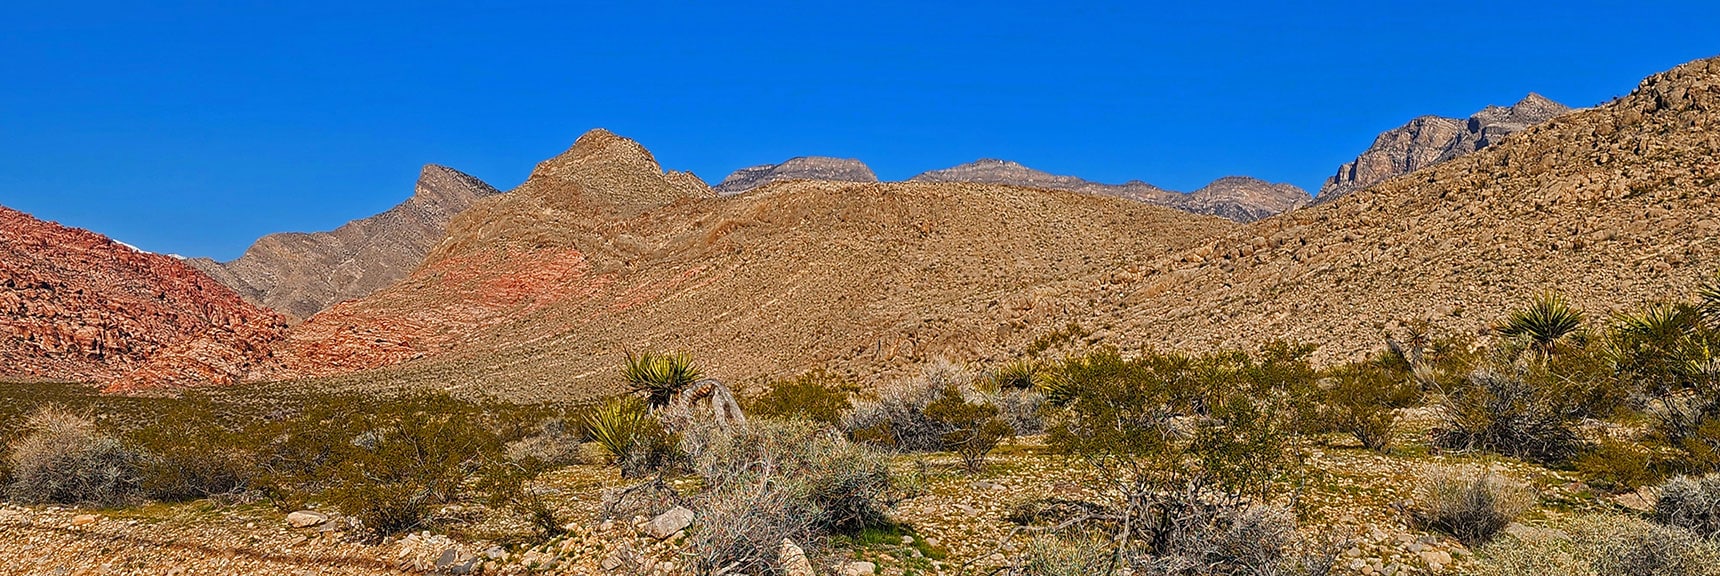 Gray Cap Ridge Comes Into View Between the Two Hills | Gray Cap Ridge Southeast Summit | La Madre Mountains Wilderness, Nevada